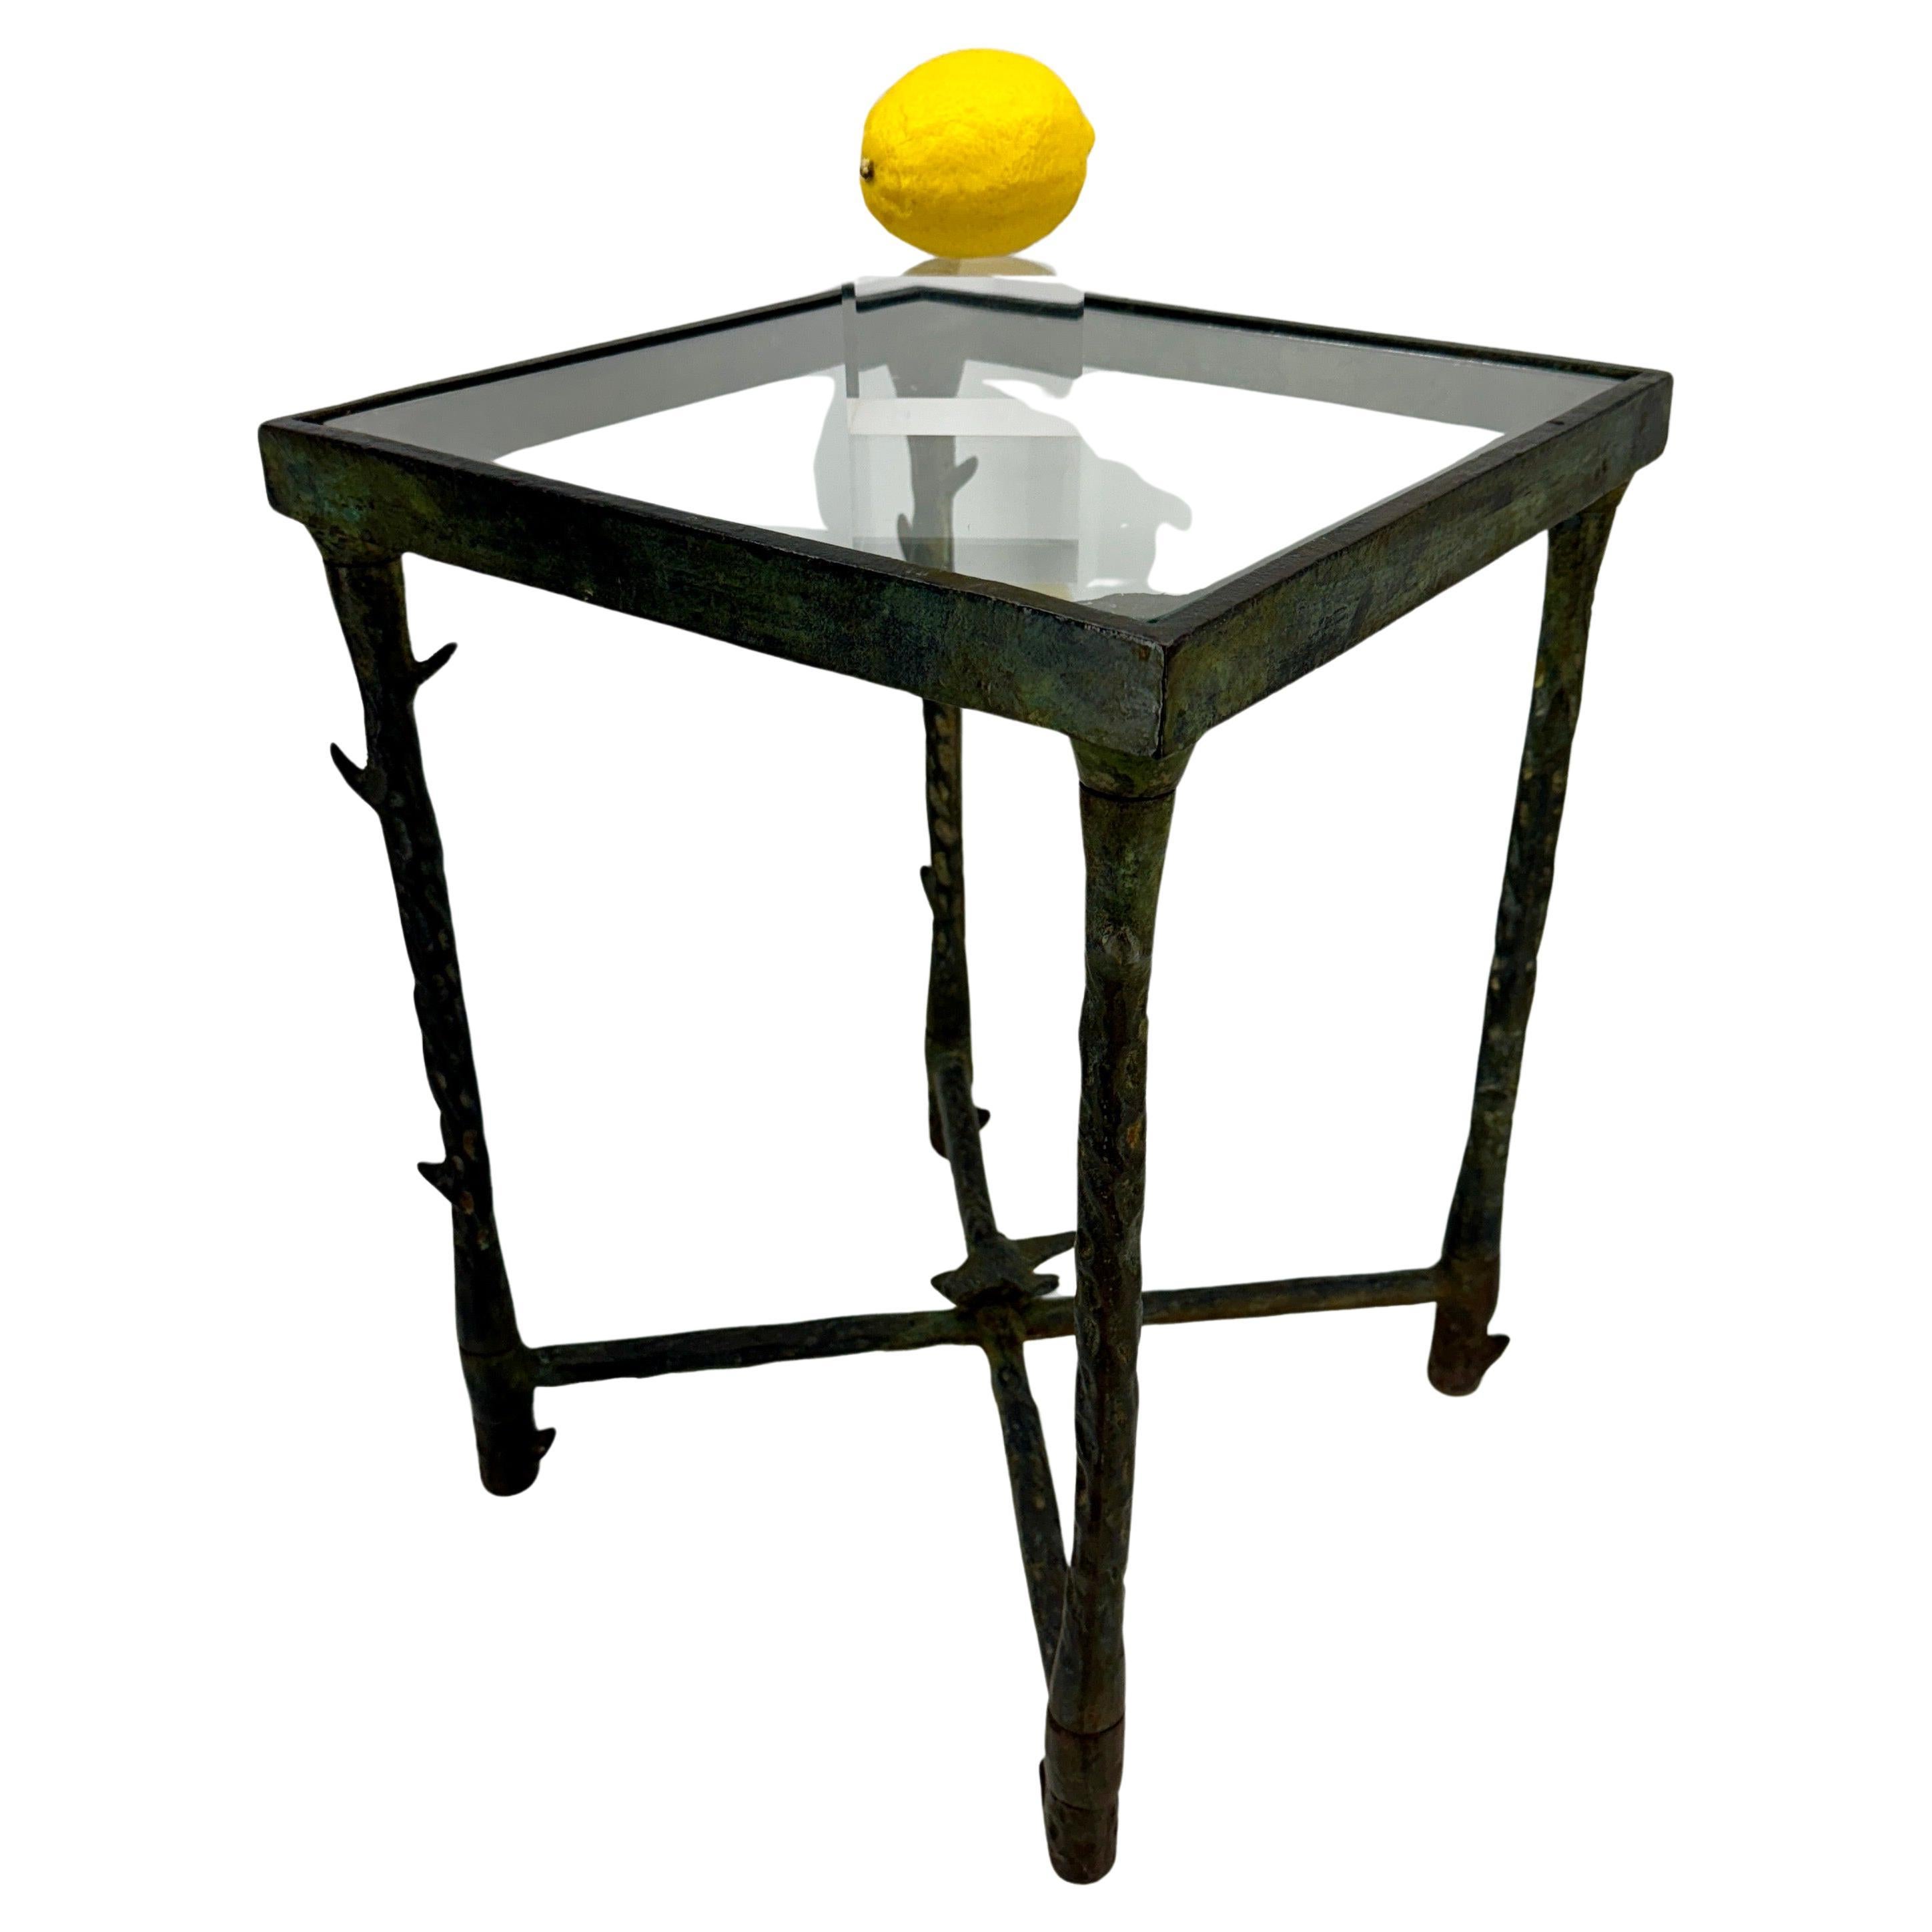 Cast Iron Accent Side Table with Square Glass Top

Unique Mid-Century hand-crafted metal table with branches and a bird, perfect used formally or informally. This eye-catching, versatile table will certainly be a conversation piece wherever placed